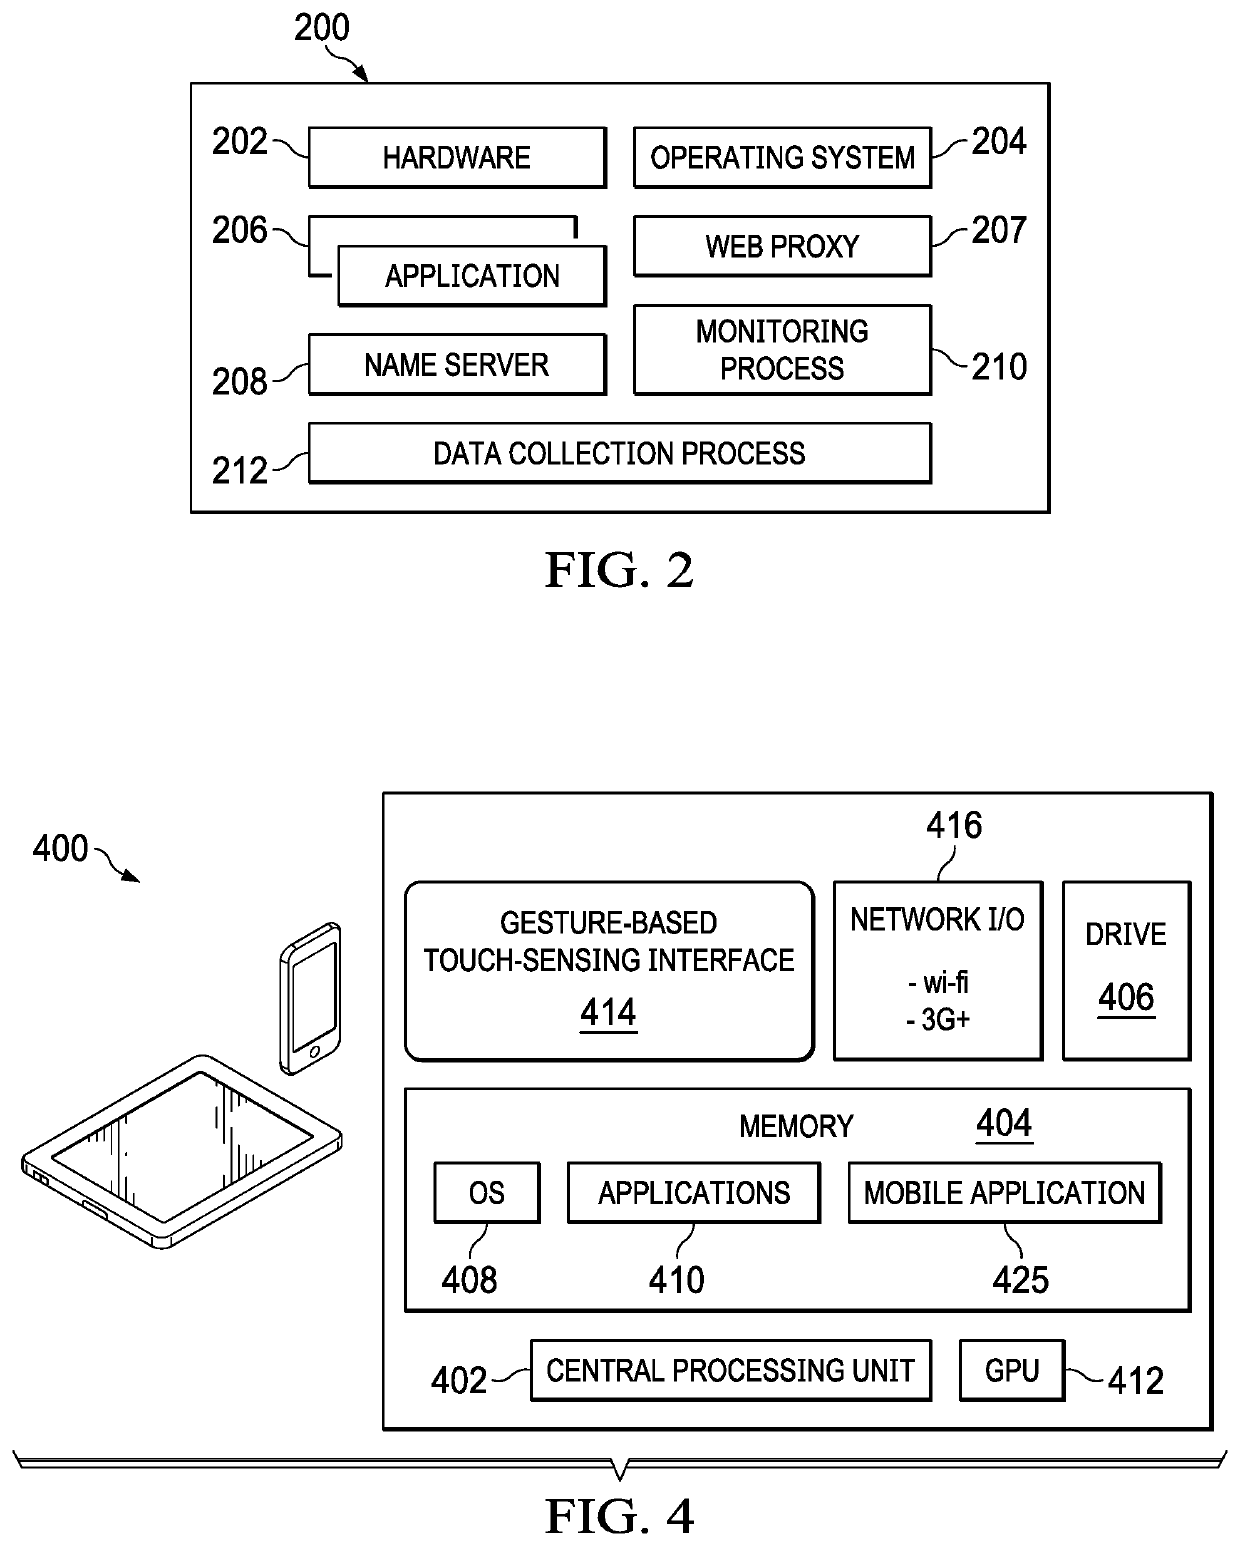 Managing mobile device user subscription and service preferences to predictively pre-fetch content